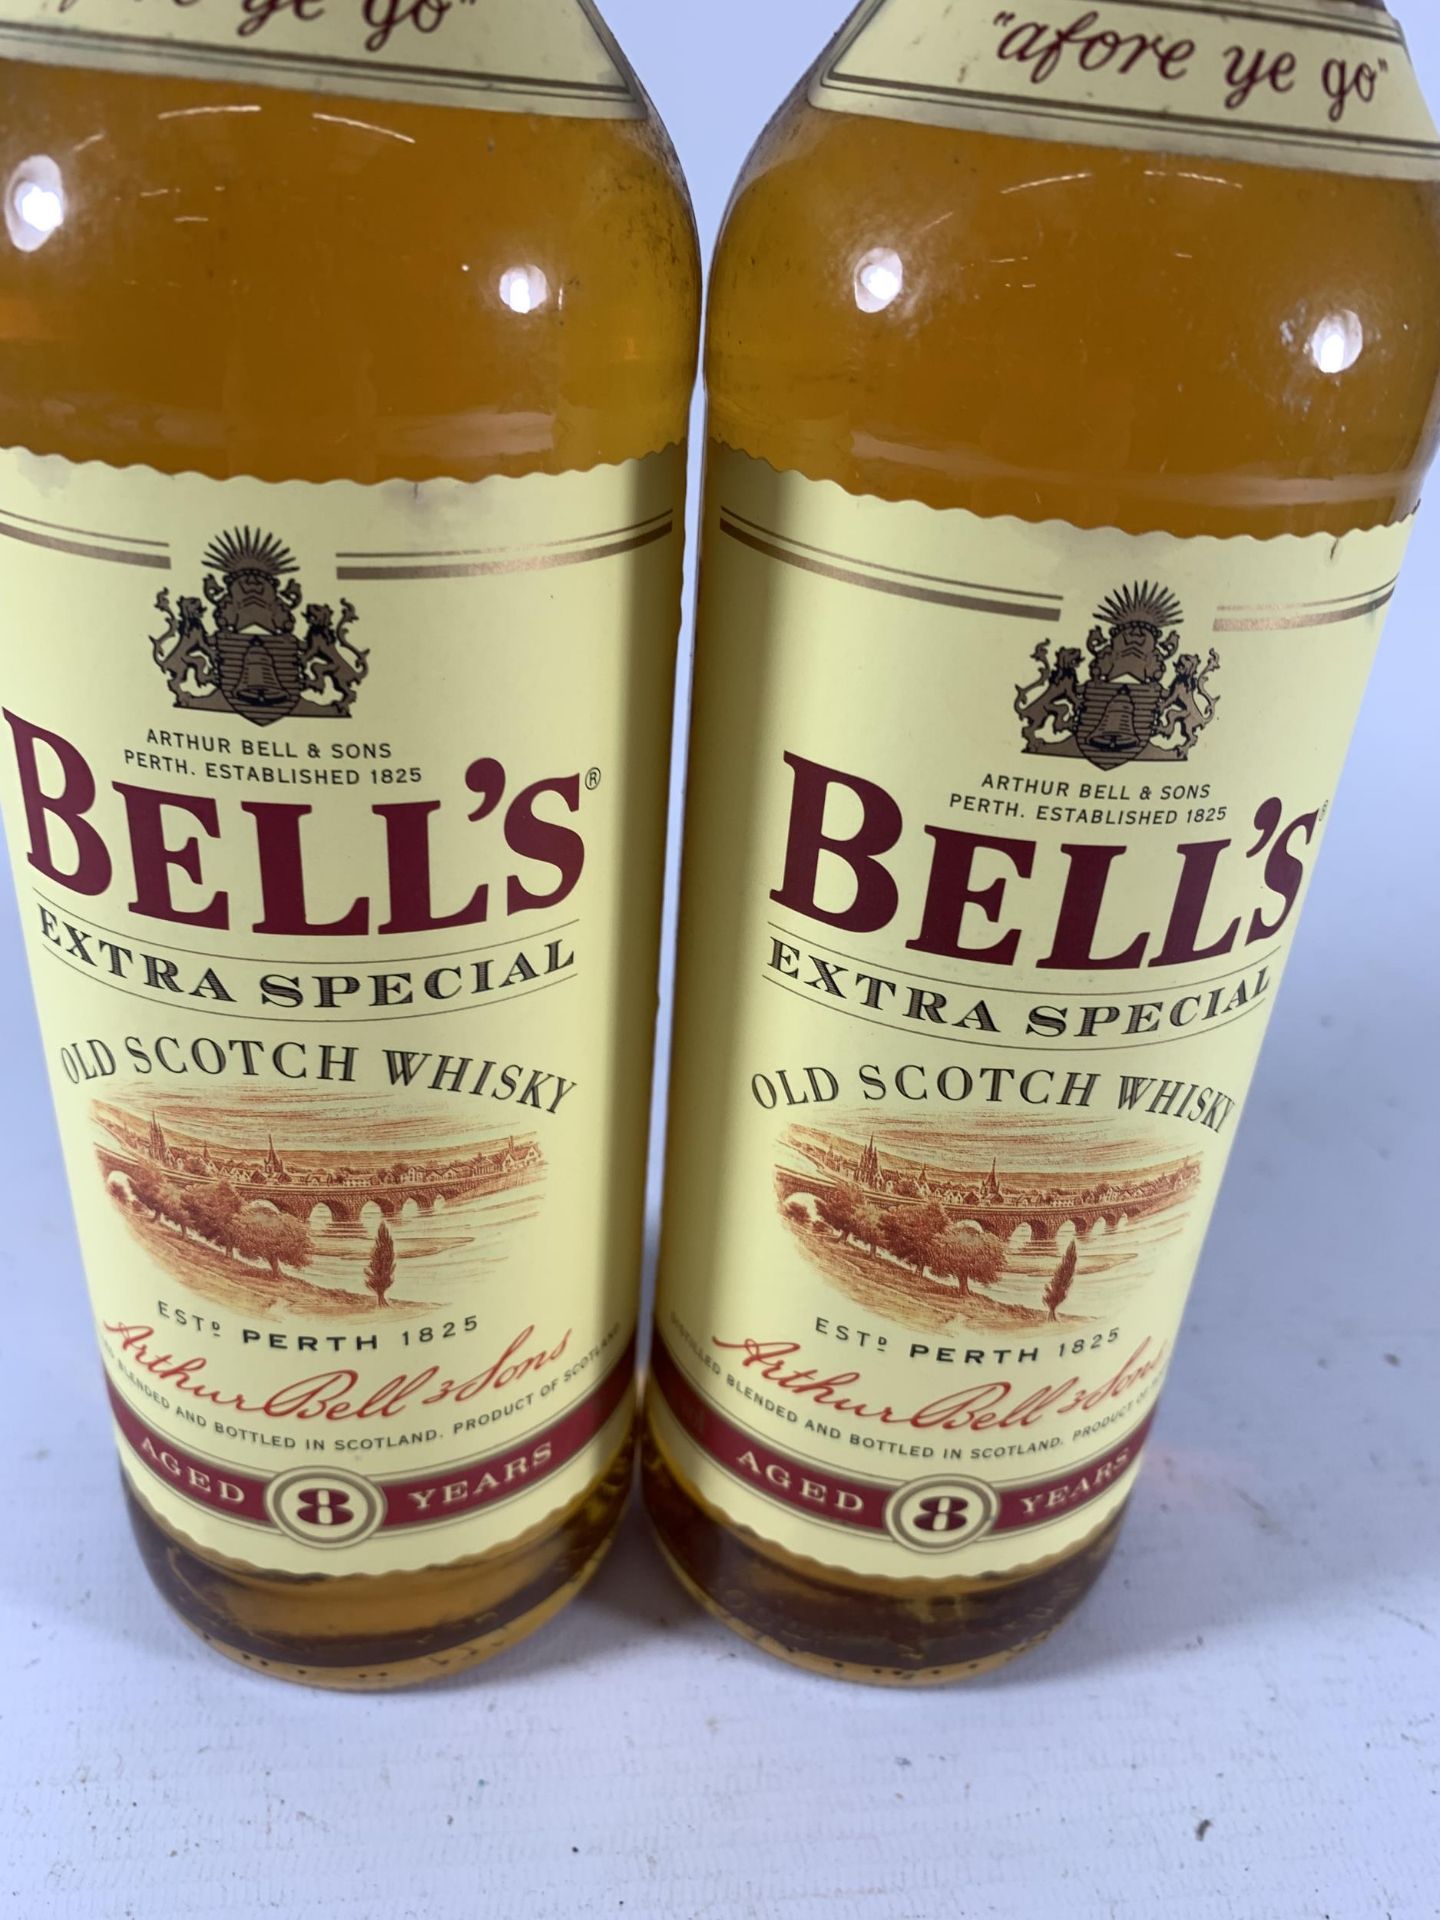 2 X 70CL BOTTLE - BELL'S EXTRA SPECIAL AGED 8 YEARS OLD SCOTCH WHISKY - Image 2 of 3